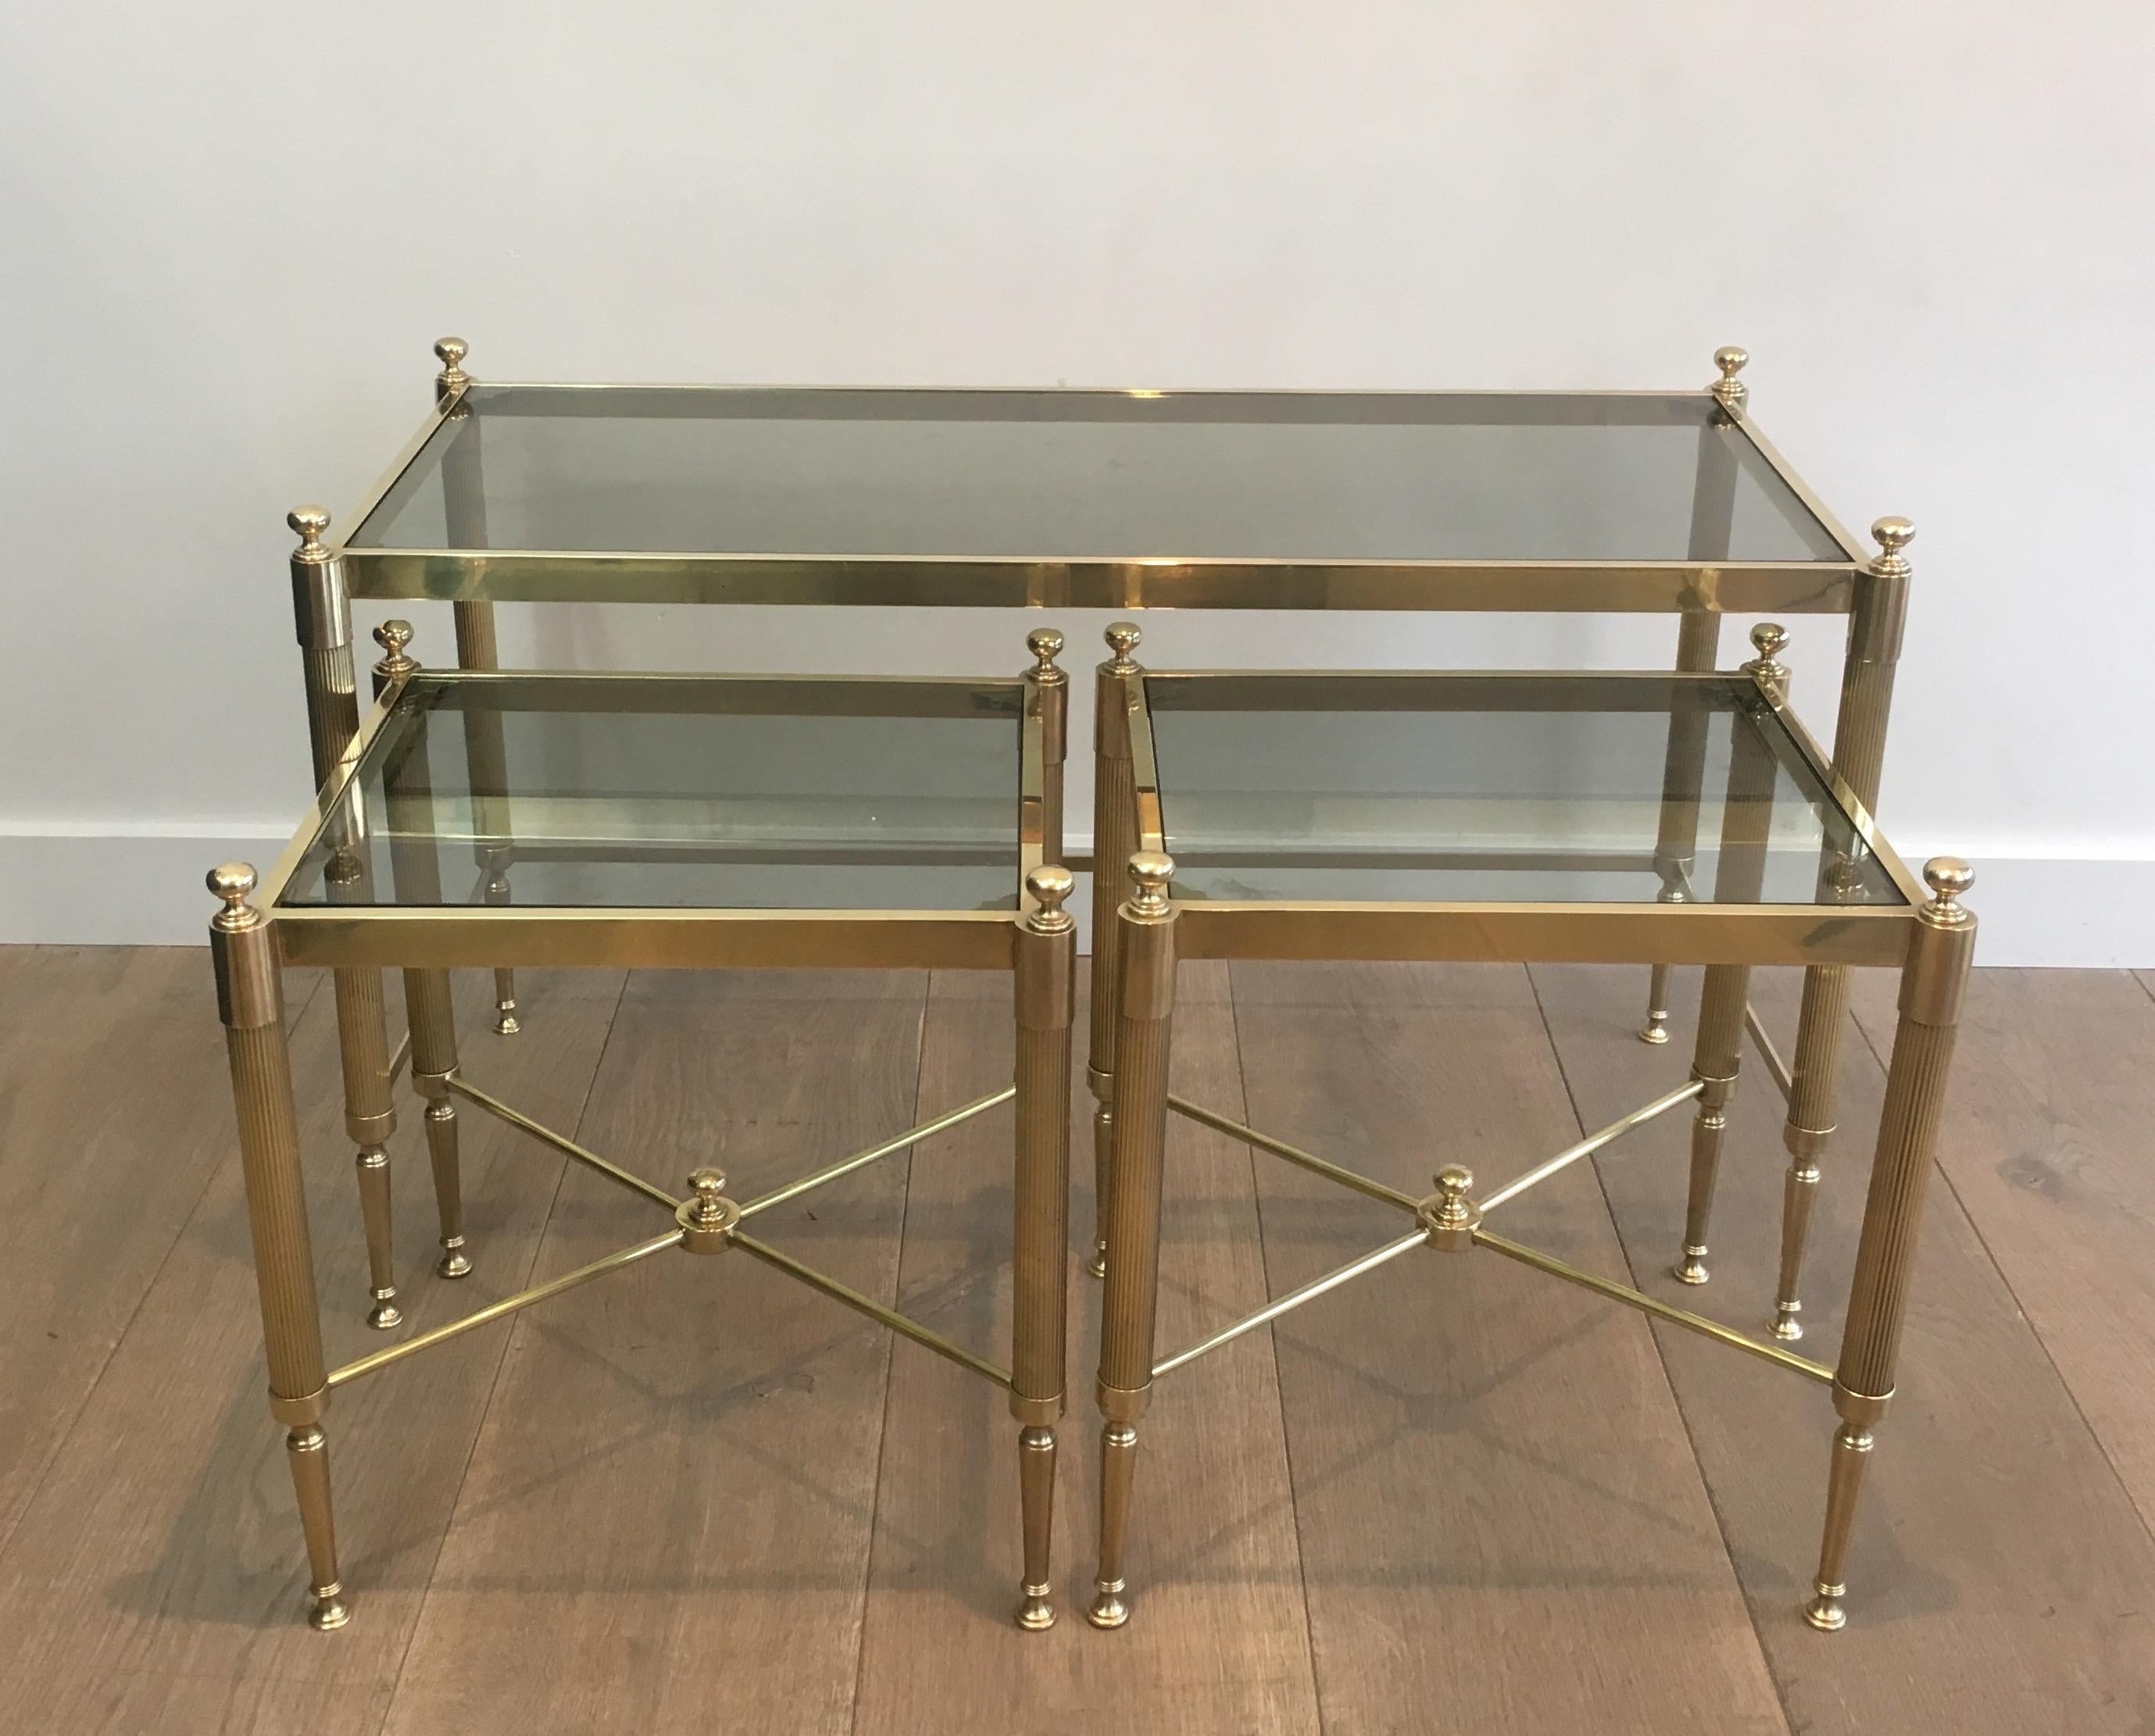 Neoclassical Tripartite Brass Coffee Table made of a Main Table and 2 Nesting Side Tables